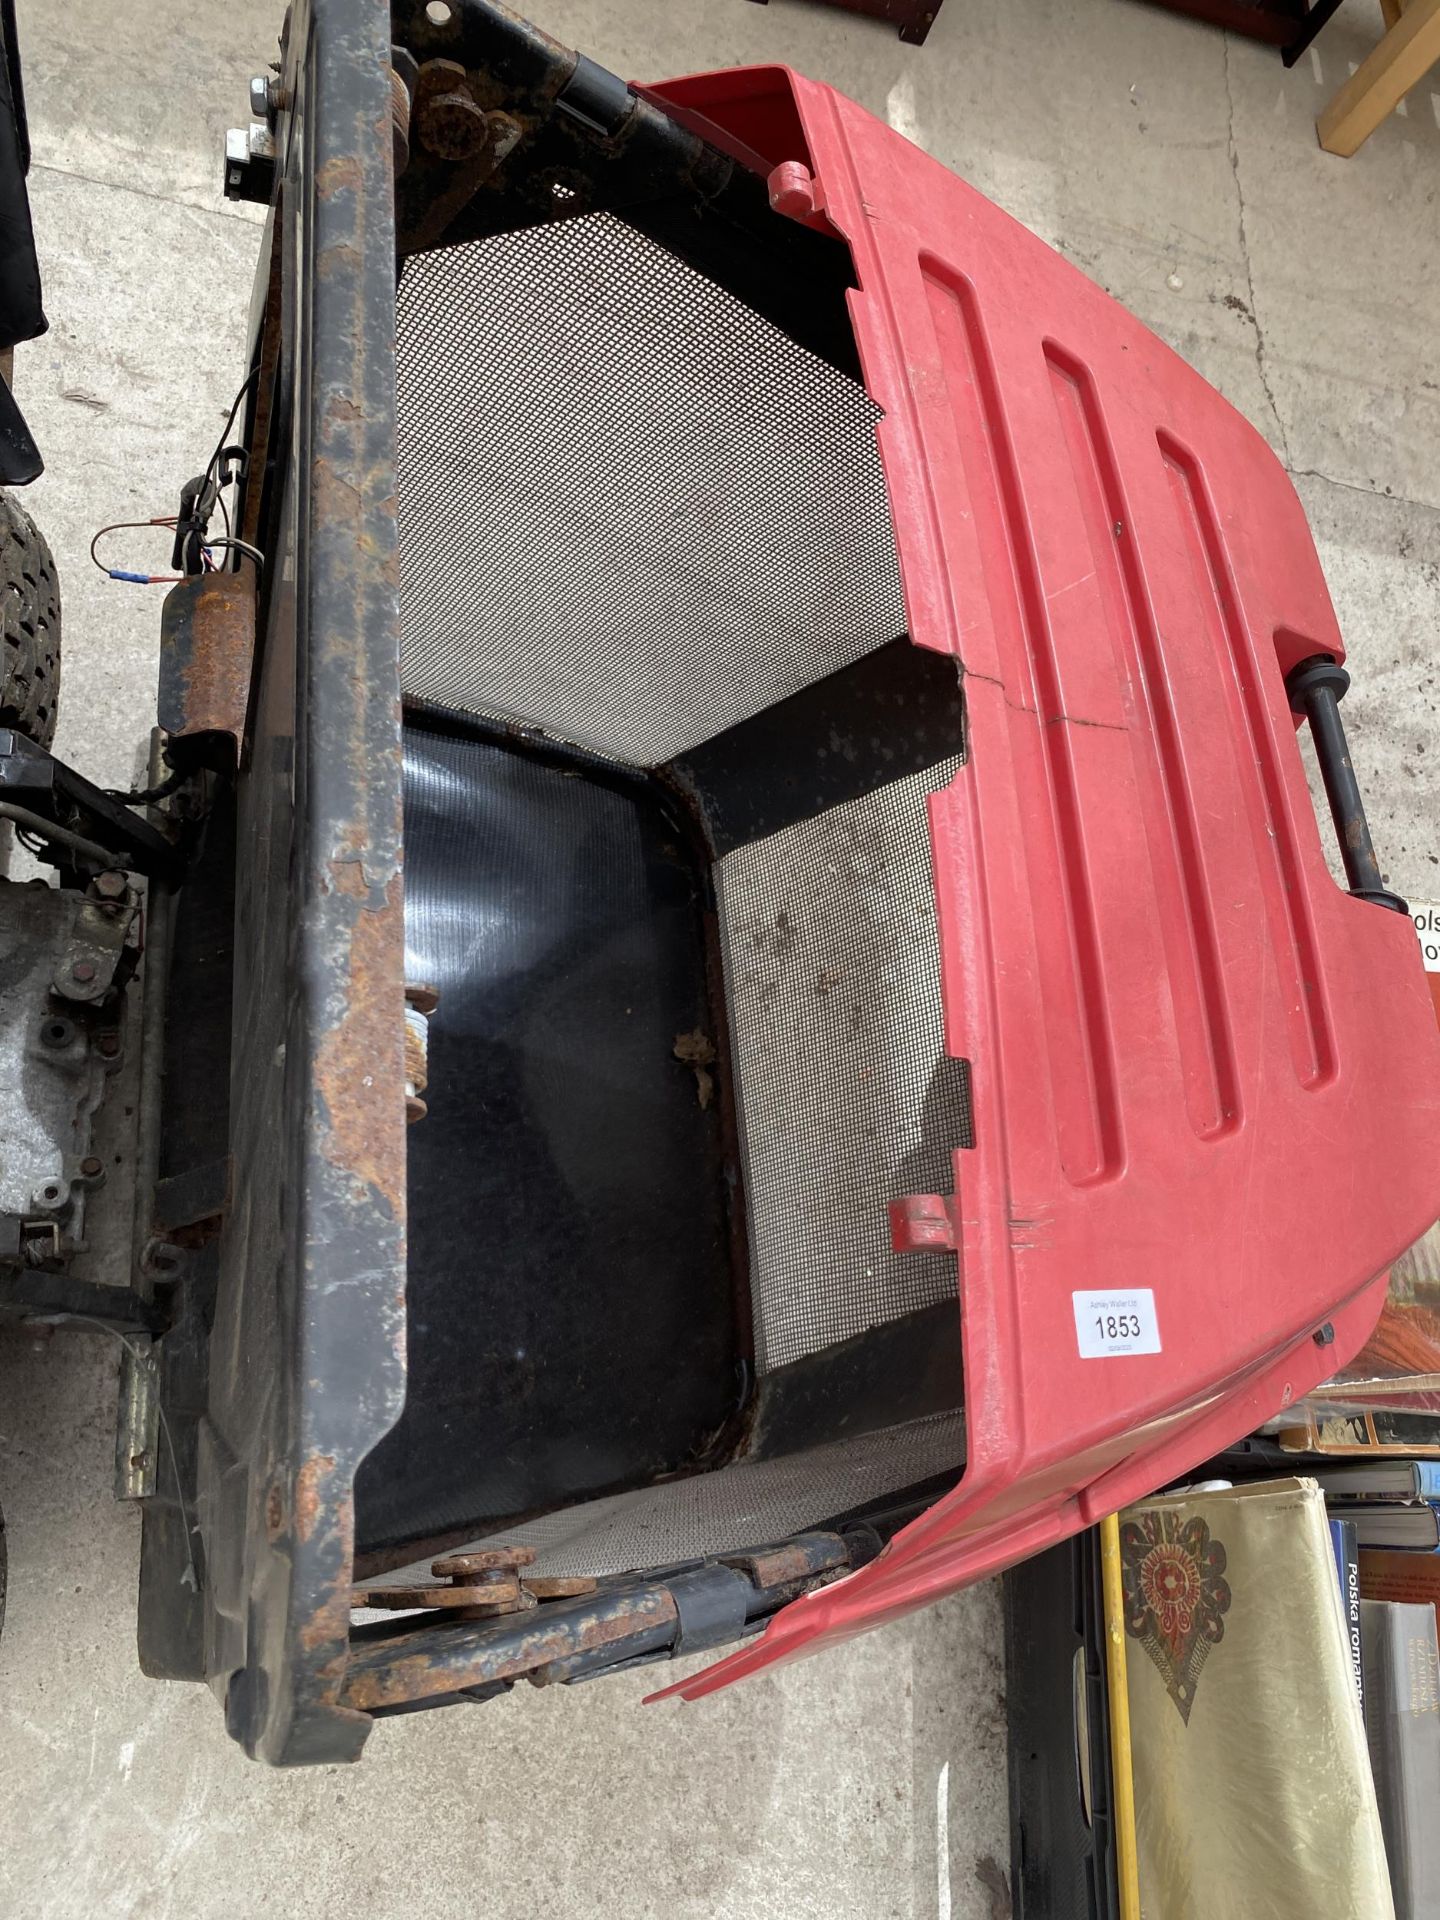 A HONDA 1211 RIDE ON LAWN MOWER WITH GRASS BOX FOR SPARES AND REPAIRS - Image 4 of 6